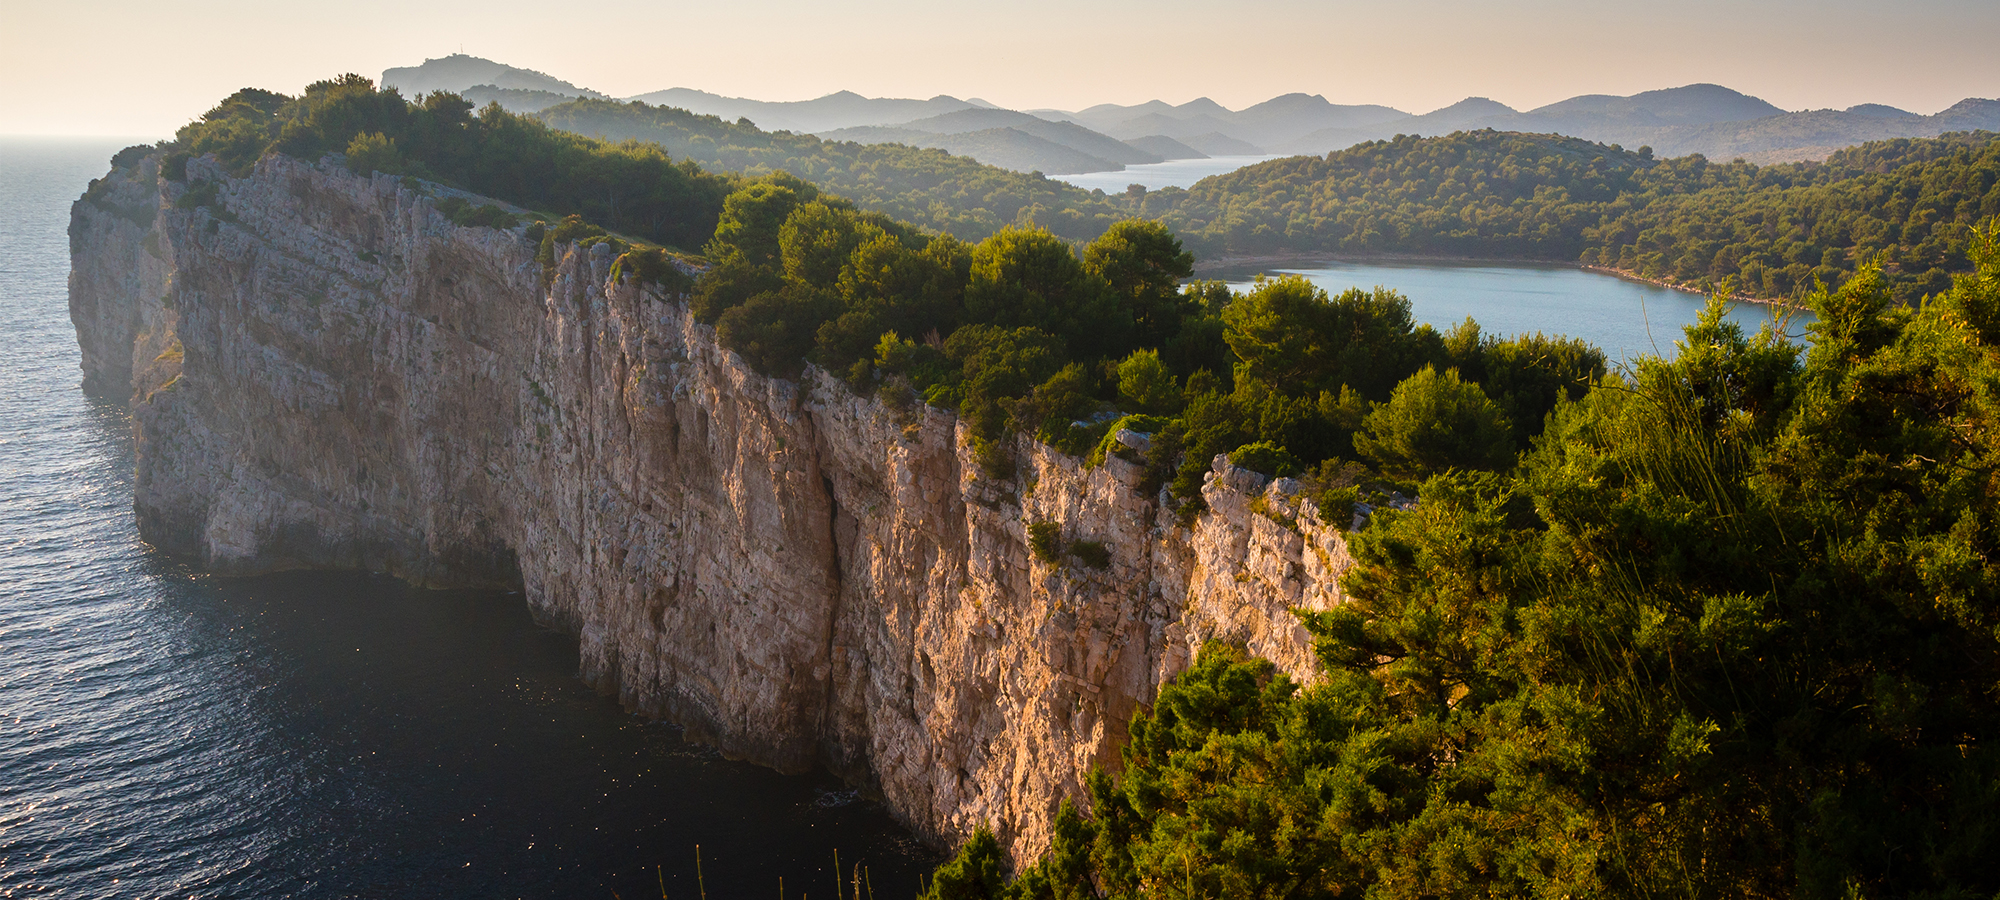 Get An Adrenaline High at These Top Cliff Climbing Spots in Dalmatia